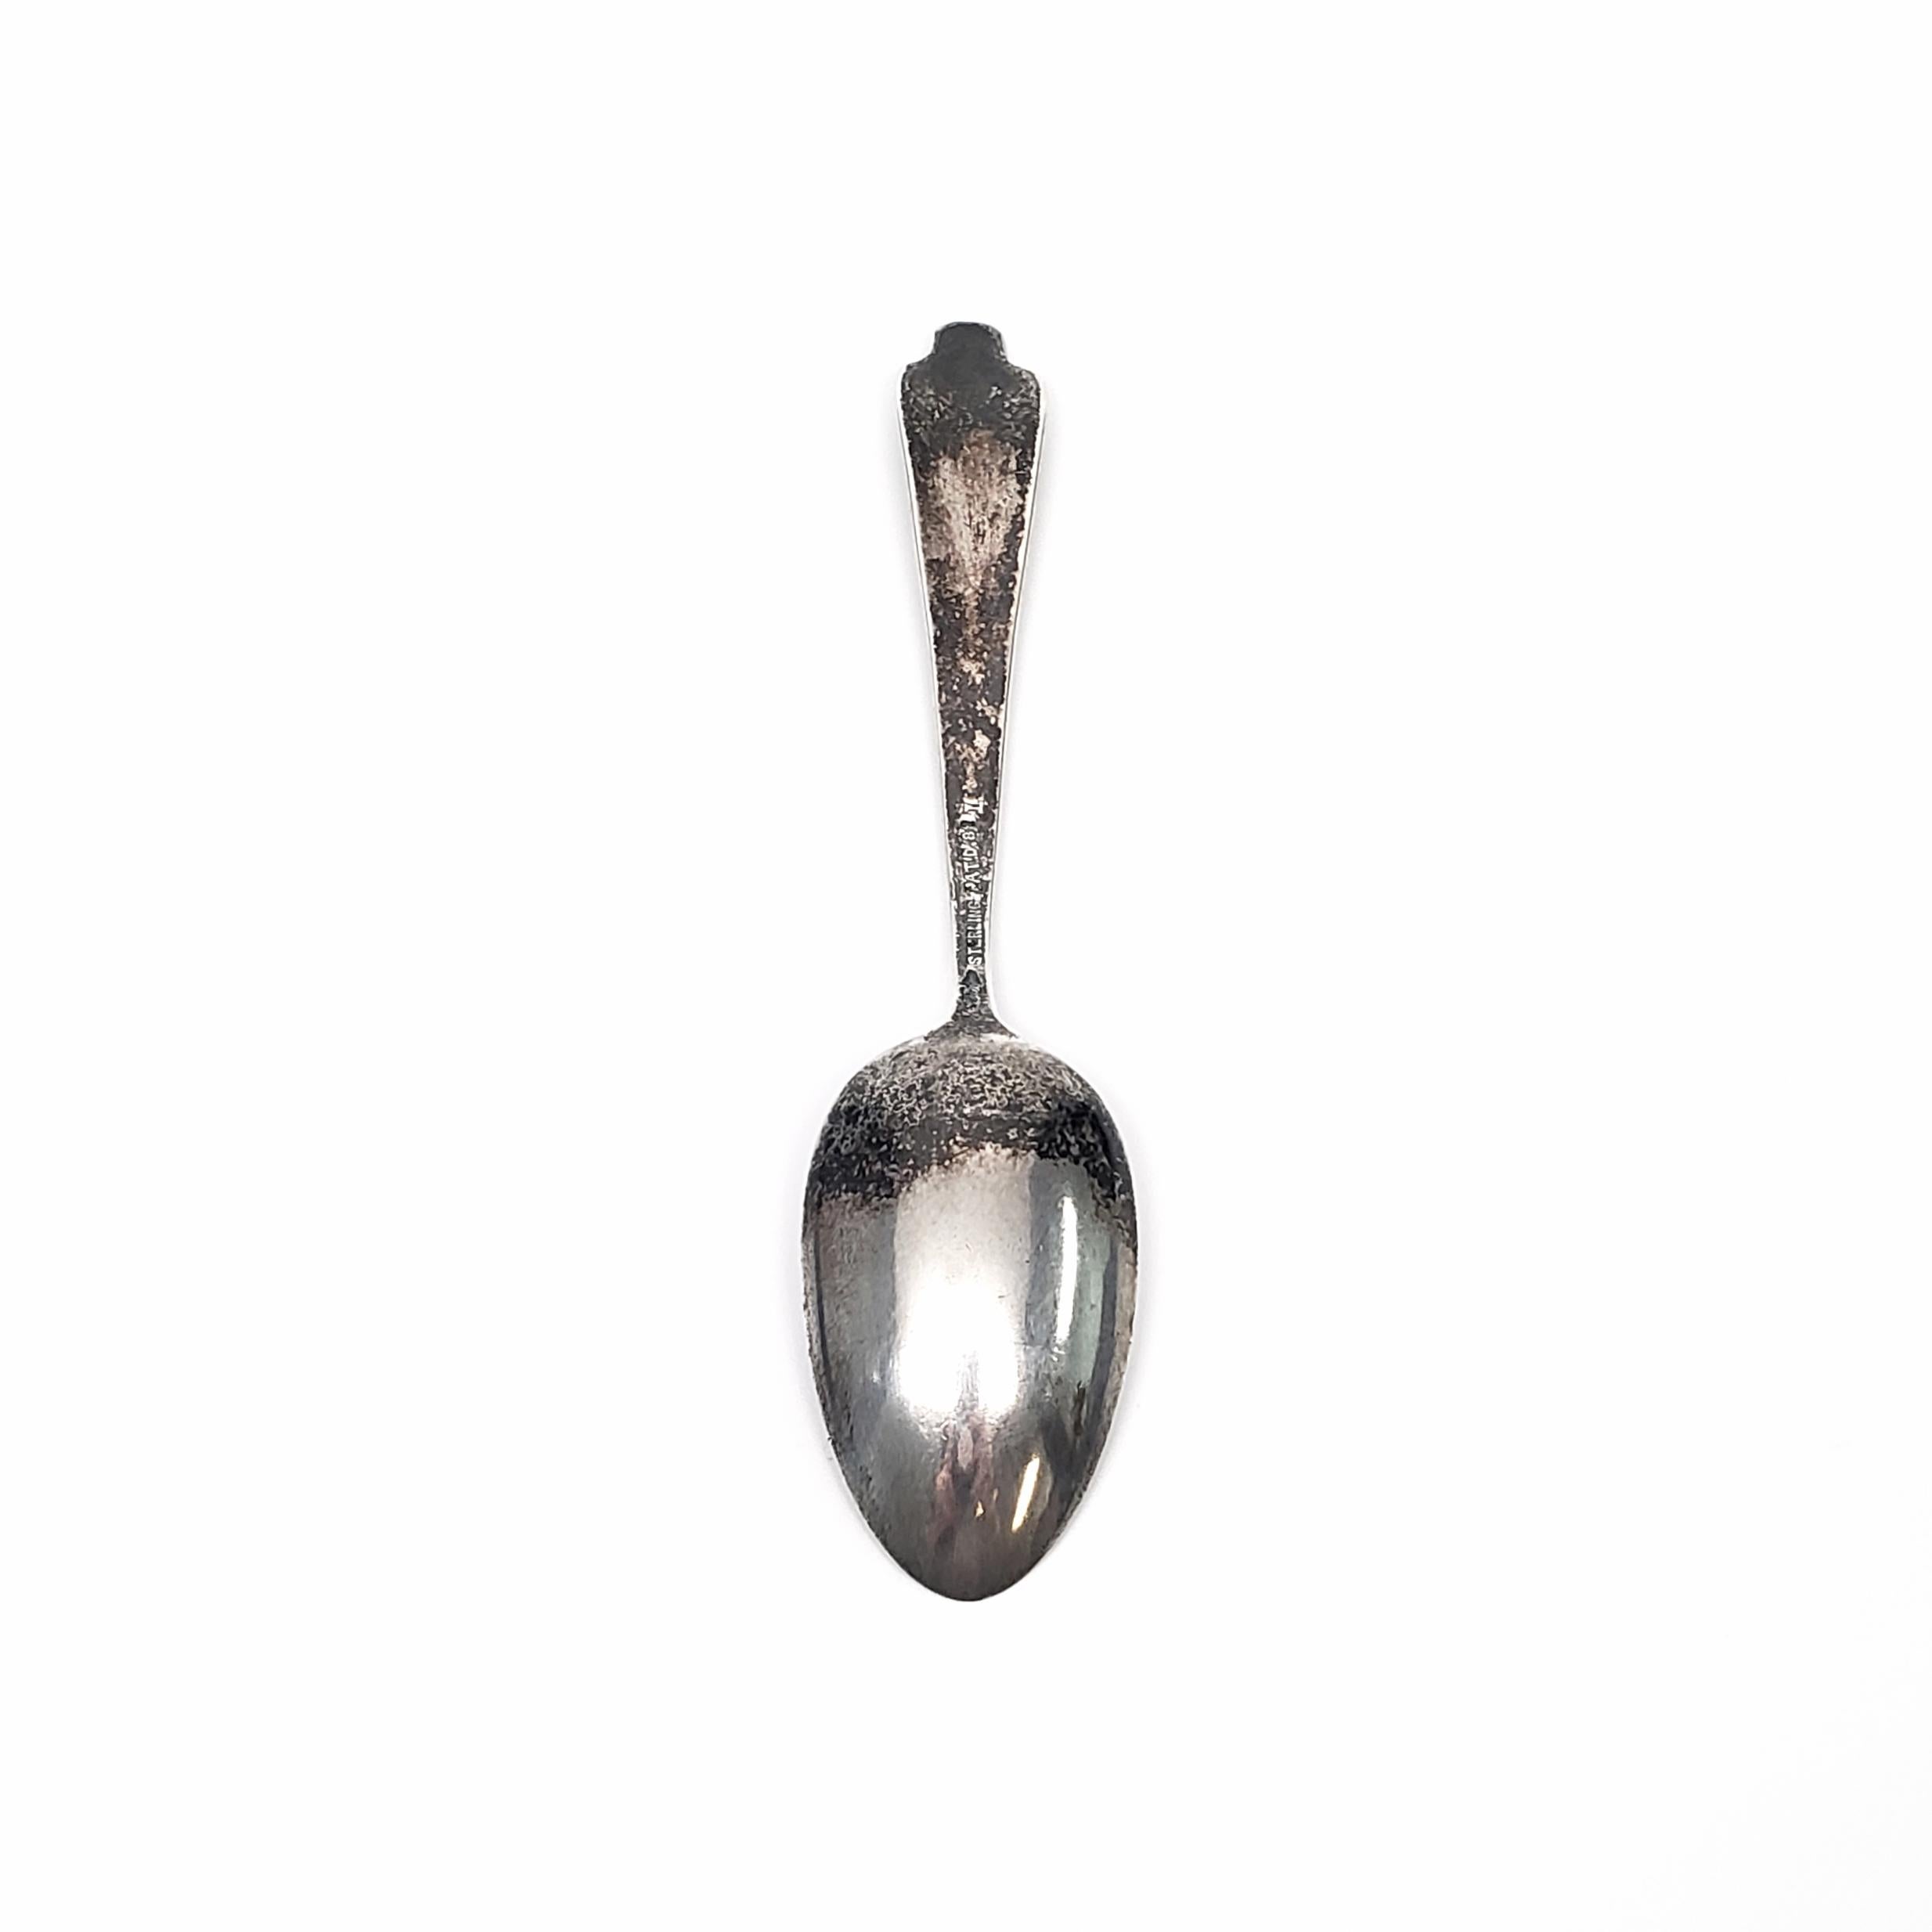 Antique sterling silver teaspoon in the Flora pattern, #1 Primrose, by George W Shiebler.

George Shiebler is known for his distinctive silver patterns. Flora is an innovative, multi-motif pattern designed in 1889 in the Art Nouveau style. Flora has